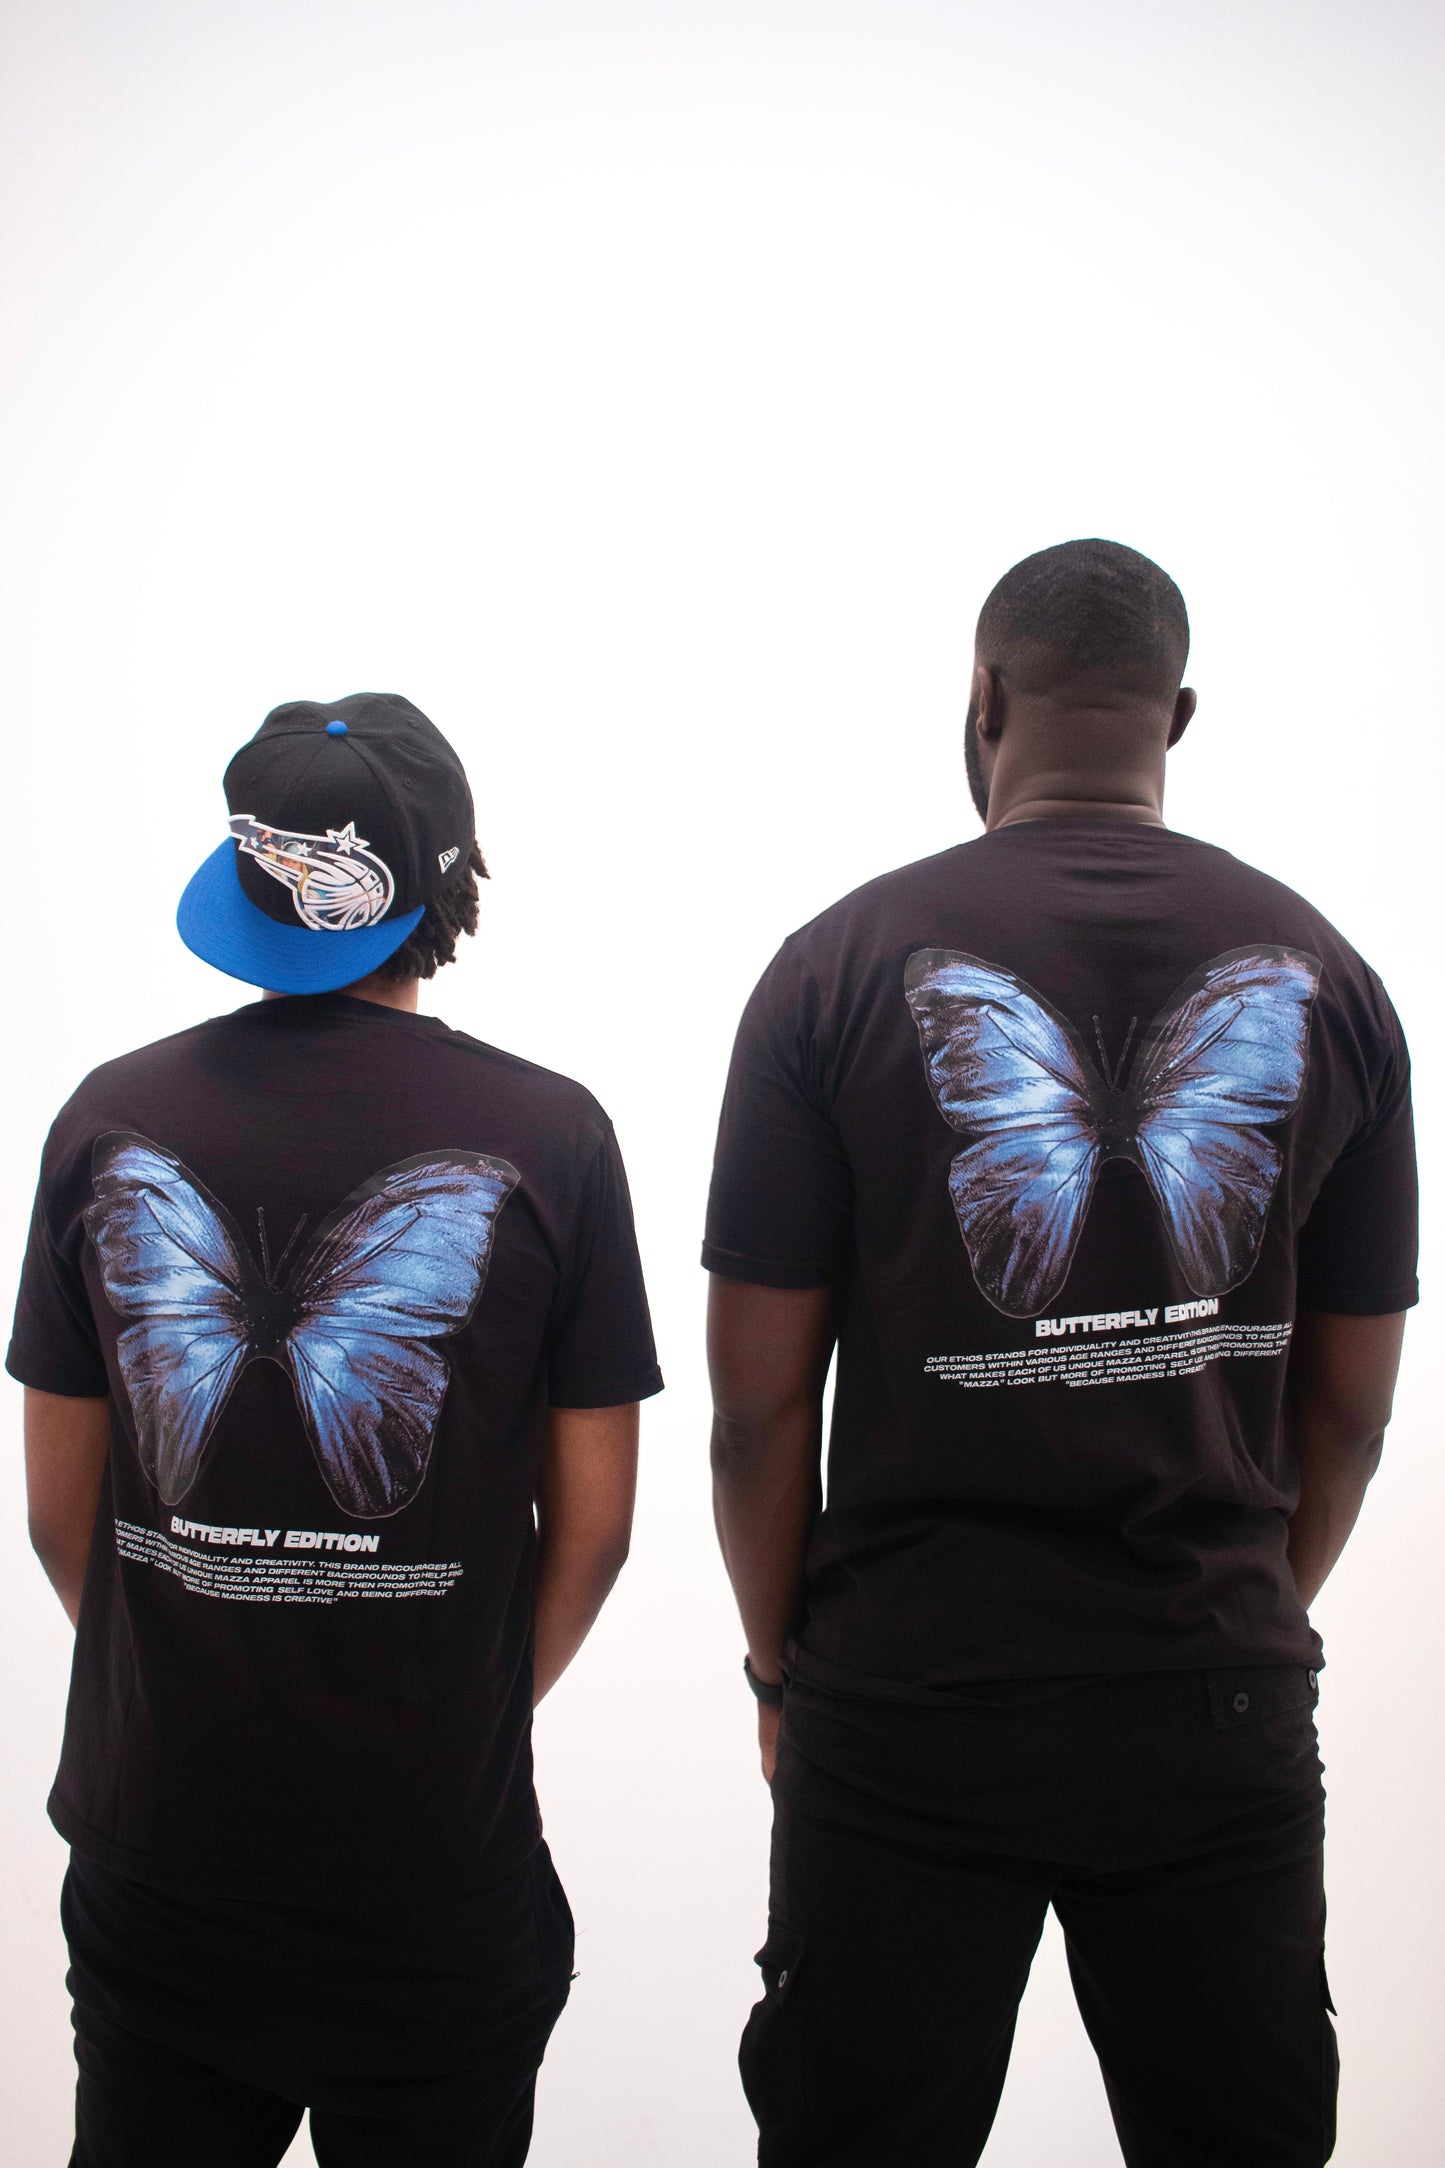 Butterfly edition graphic t-shirt (black)